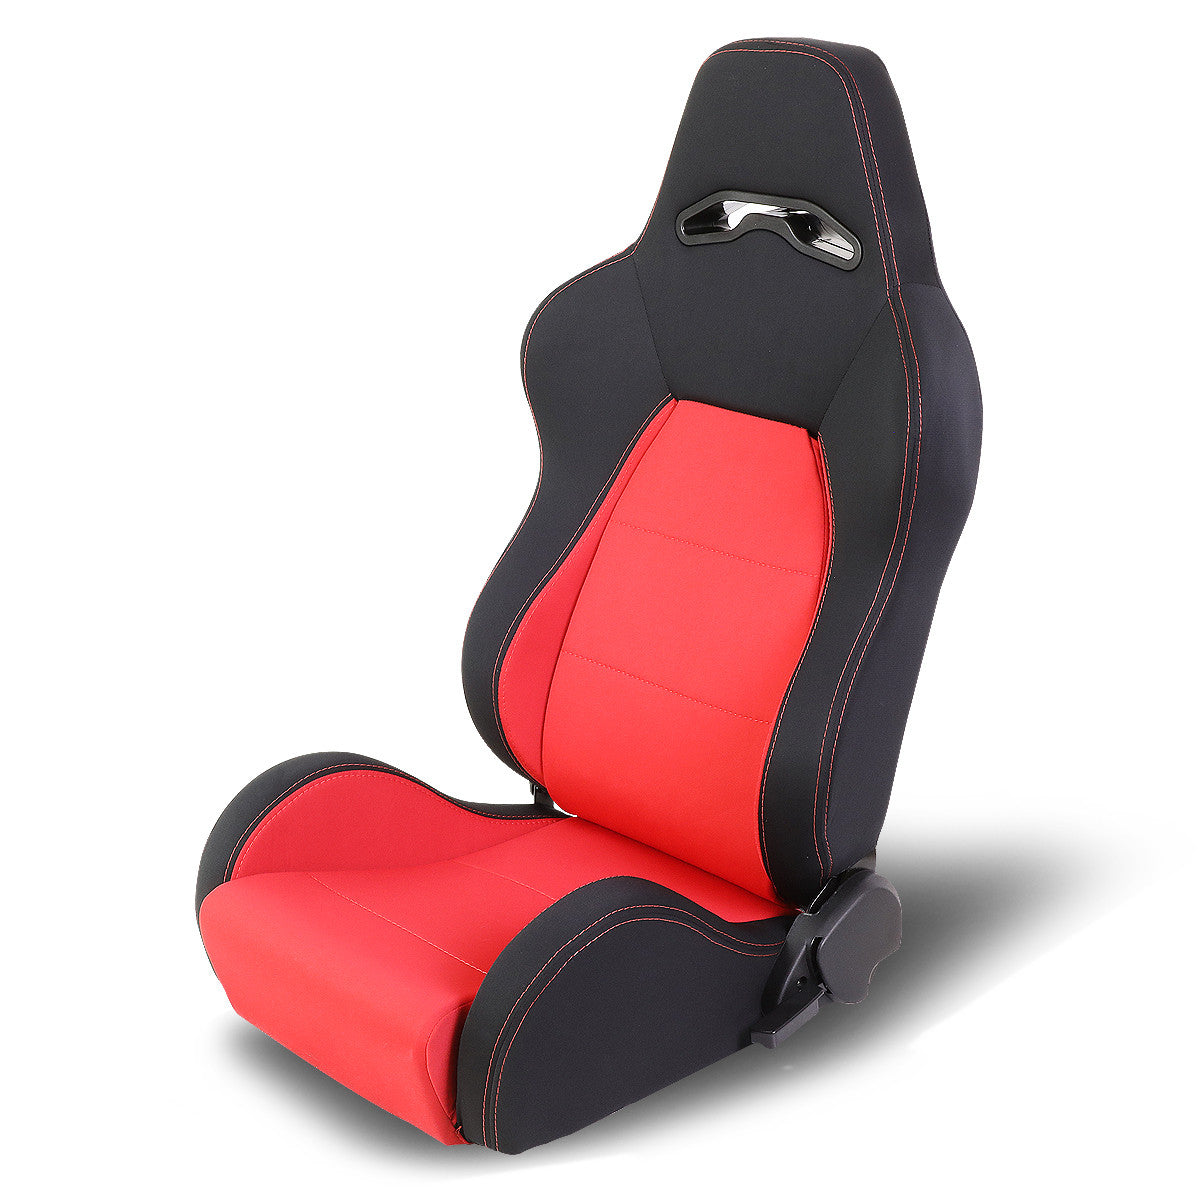 Racing Seat - Reclinable - Woven Fabric - Left